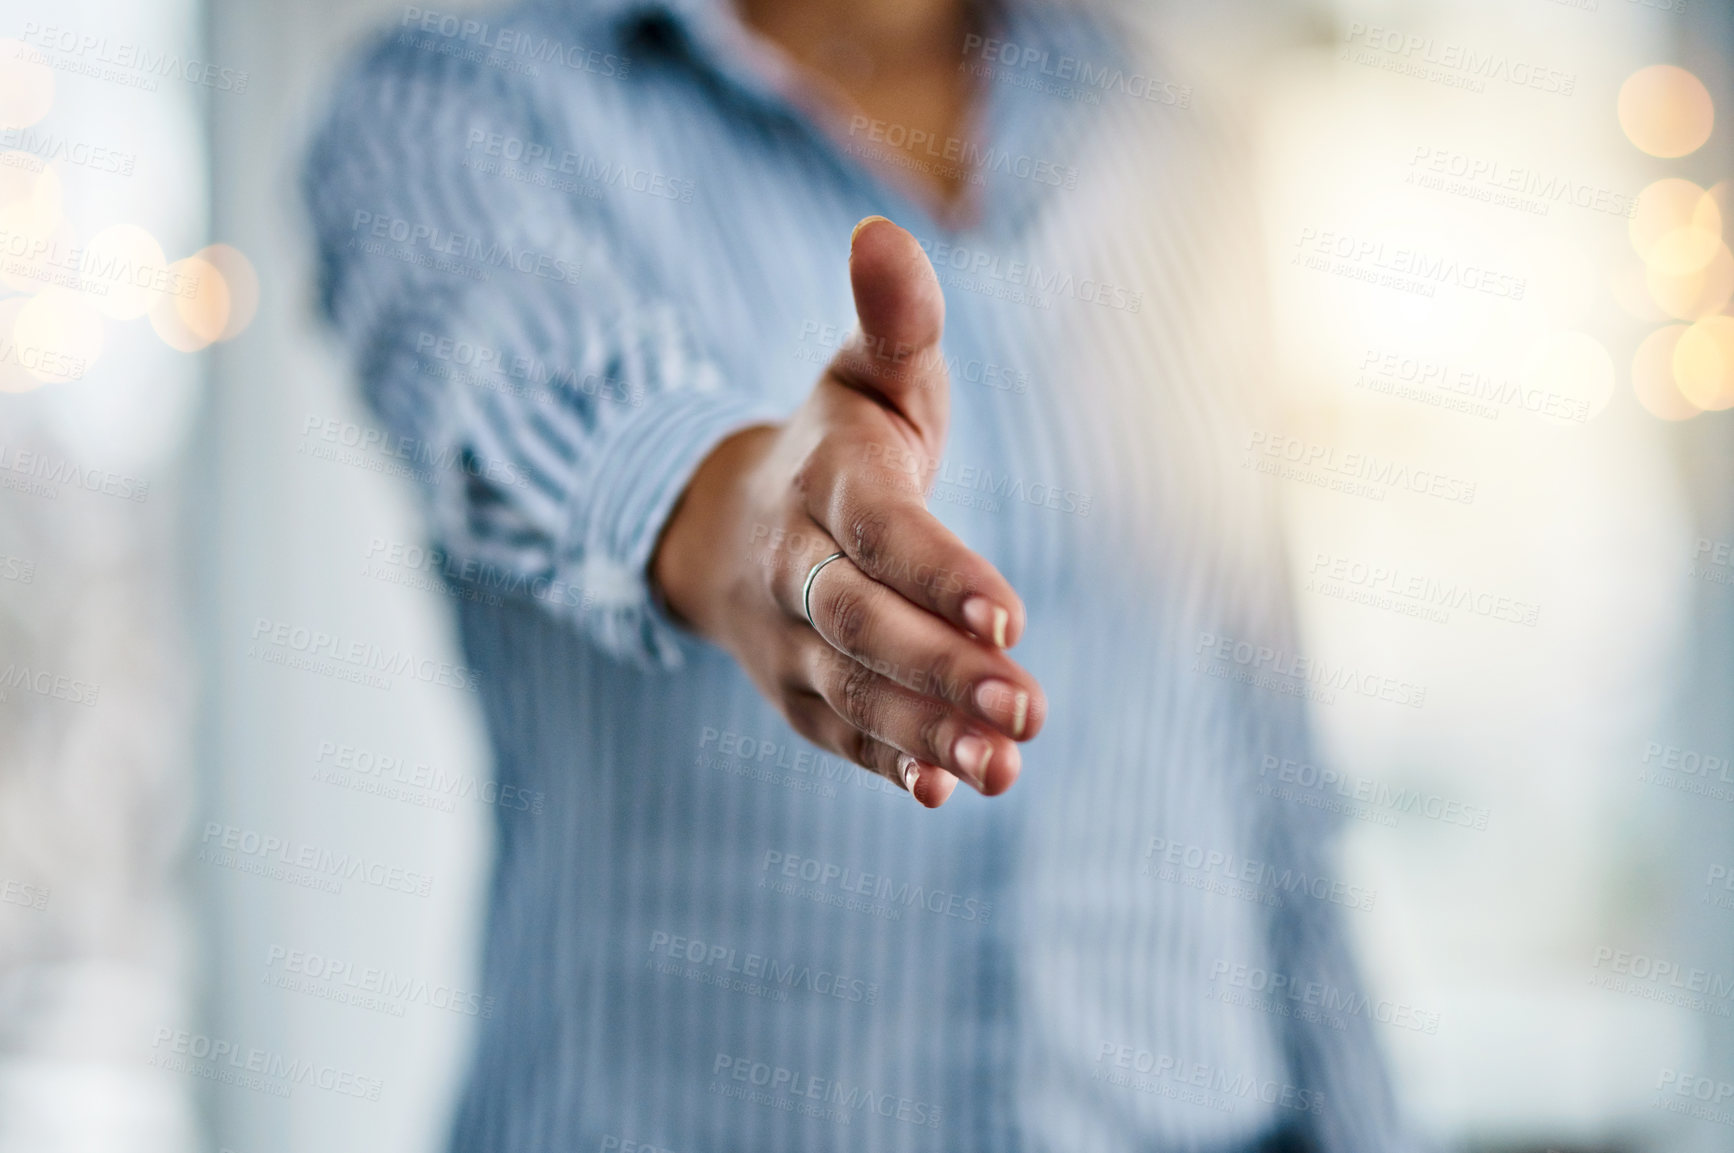 Buy stock photo Closeup shot of an unrecognizable businesswoman extending a handshake in an office